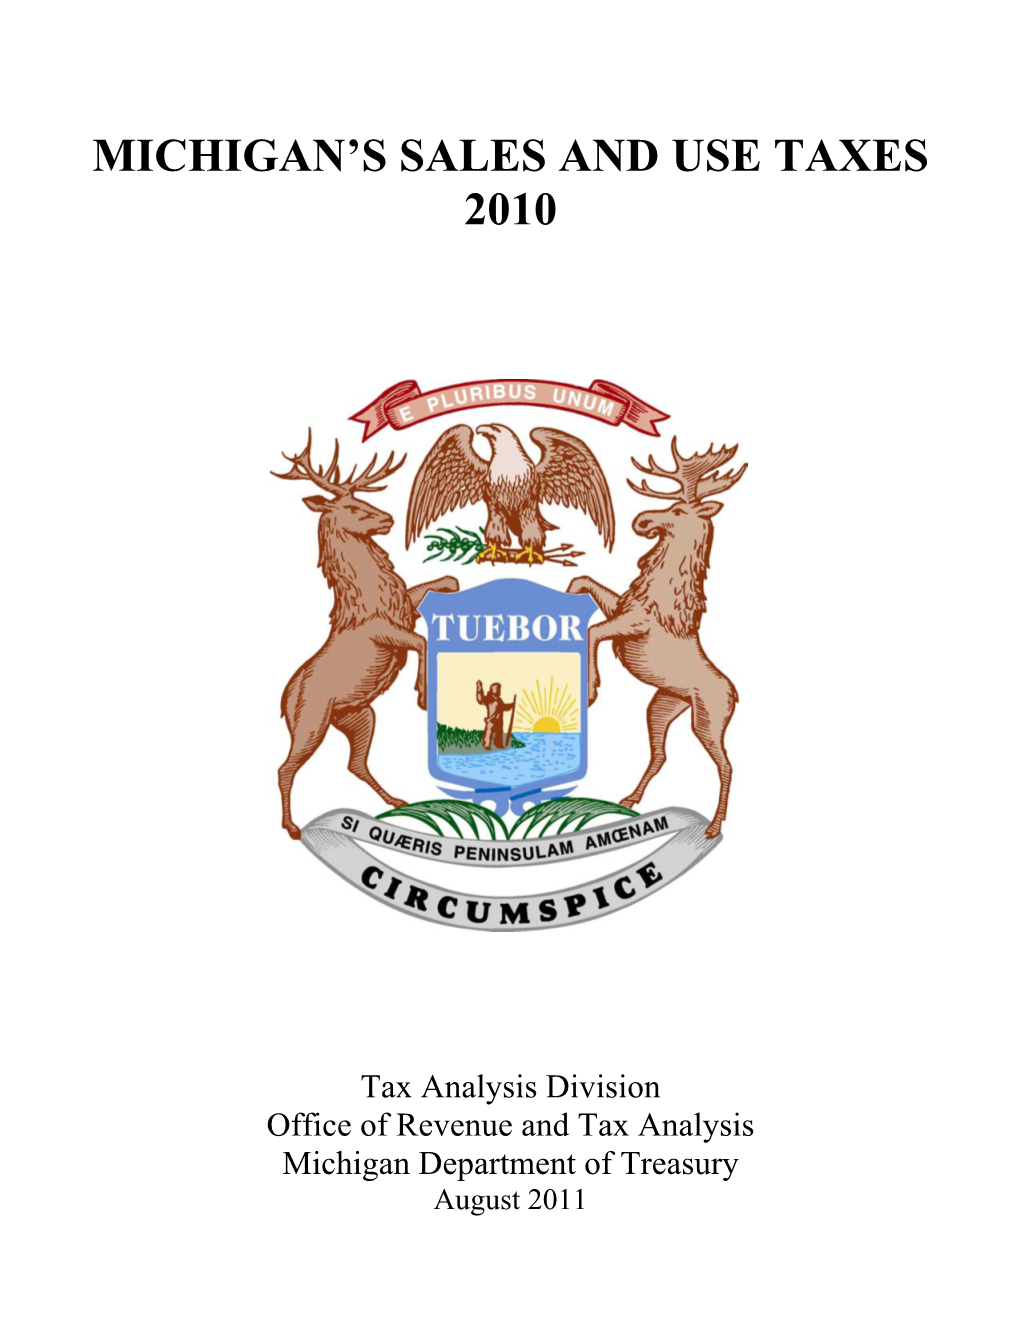 Sales and Use Taxes 2010